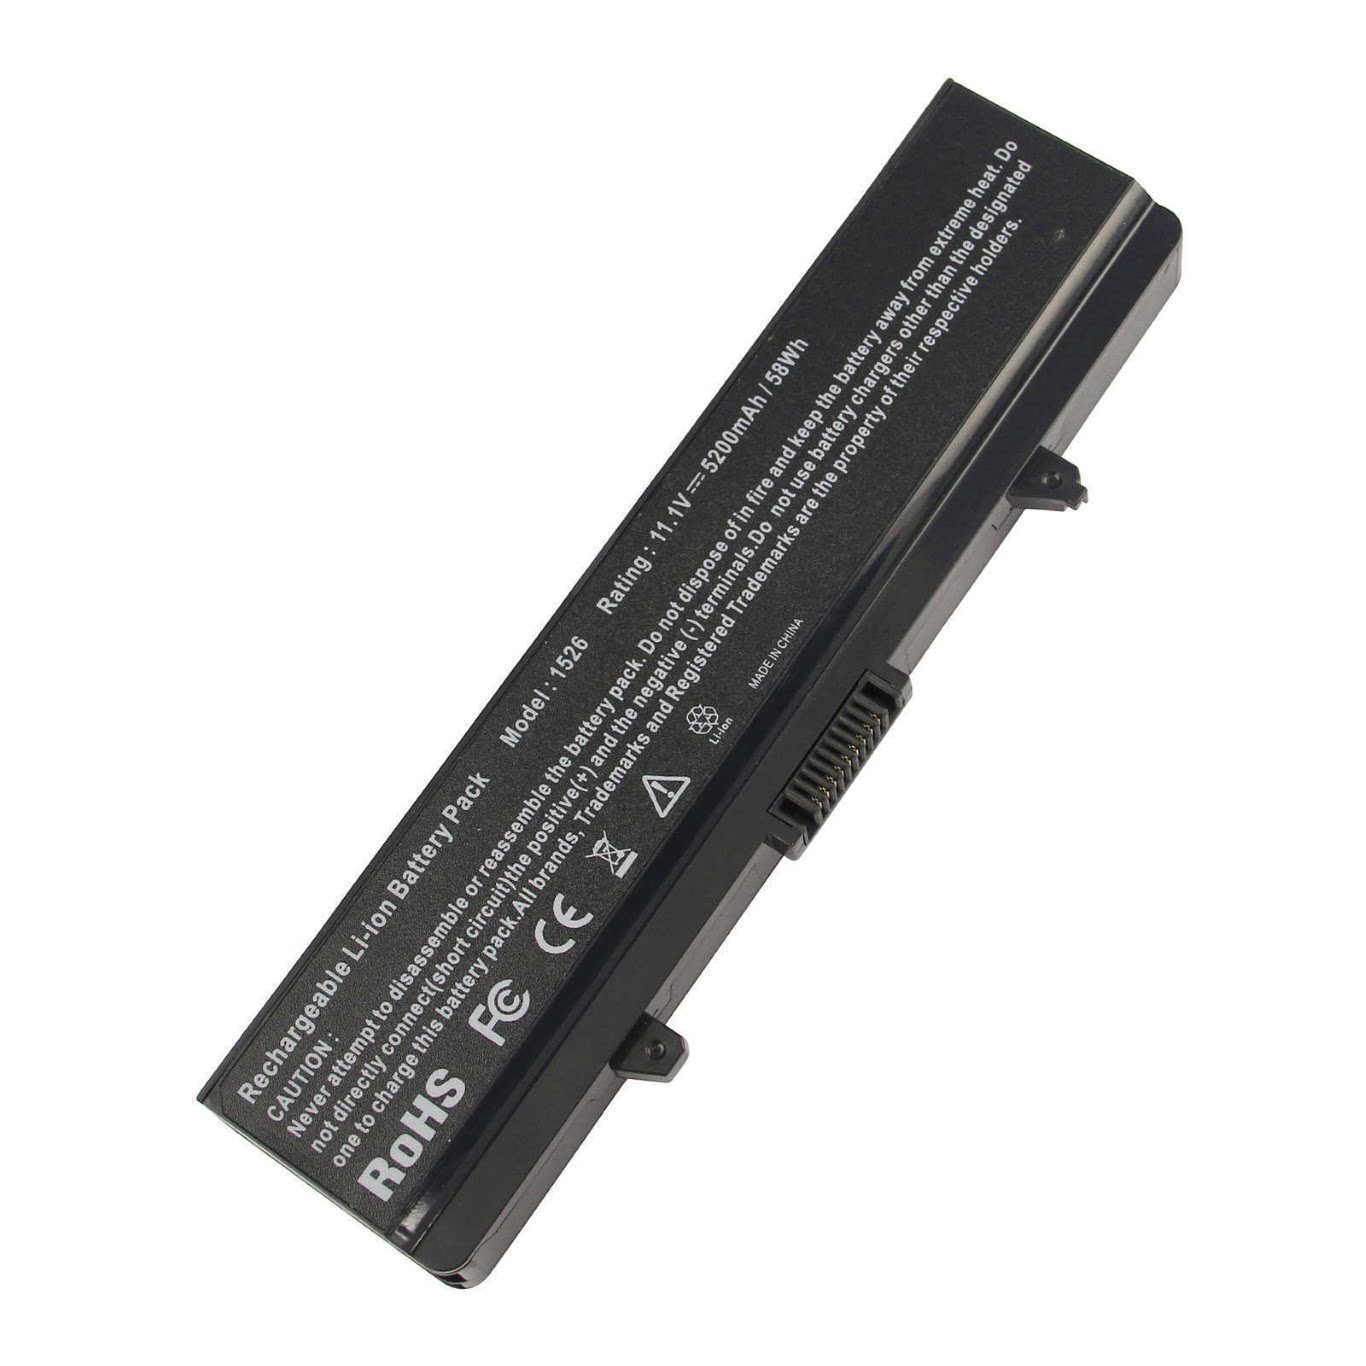 0C601H, 0CR693 replacement Laptop Battery for Dell Inspiron 14 1440, Inspiron 1525, 6 cells, 11.1V, 5200mAh